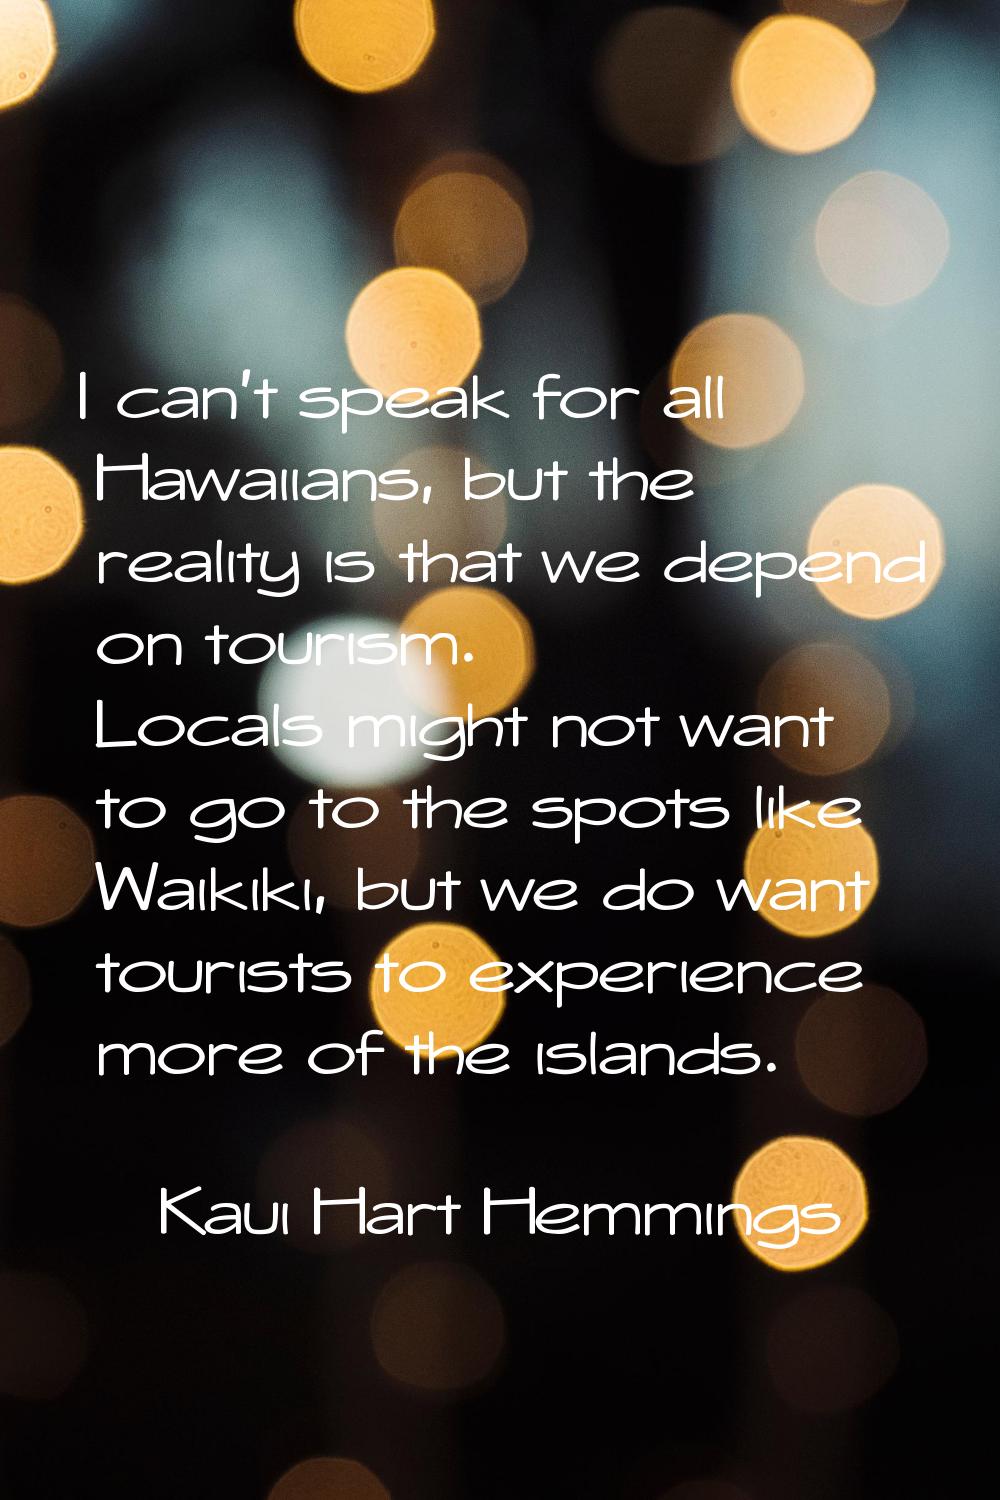 I can't speak for all Hawaiians, but the reality is that we depend on tourism. Locals might not wan